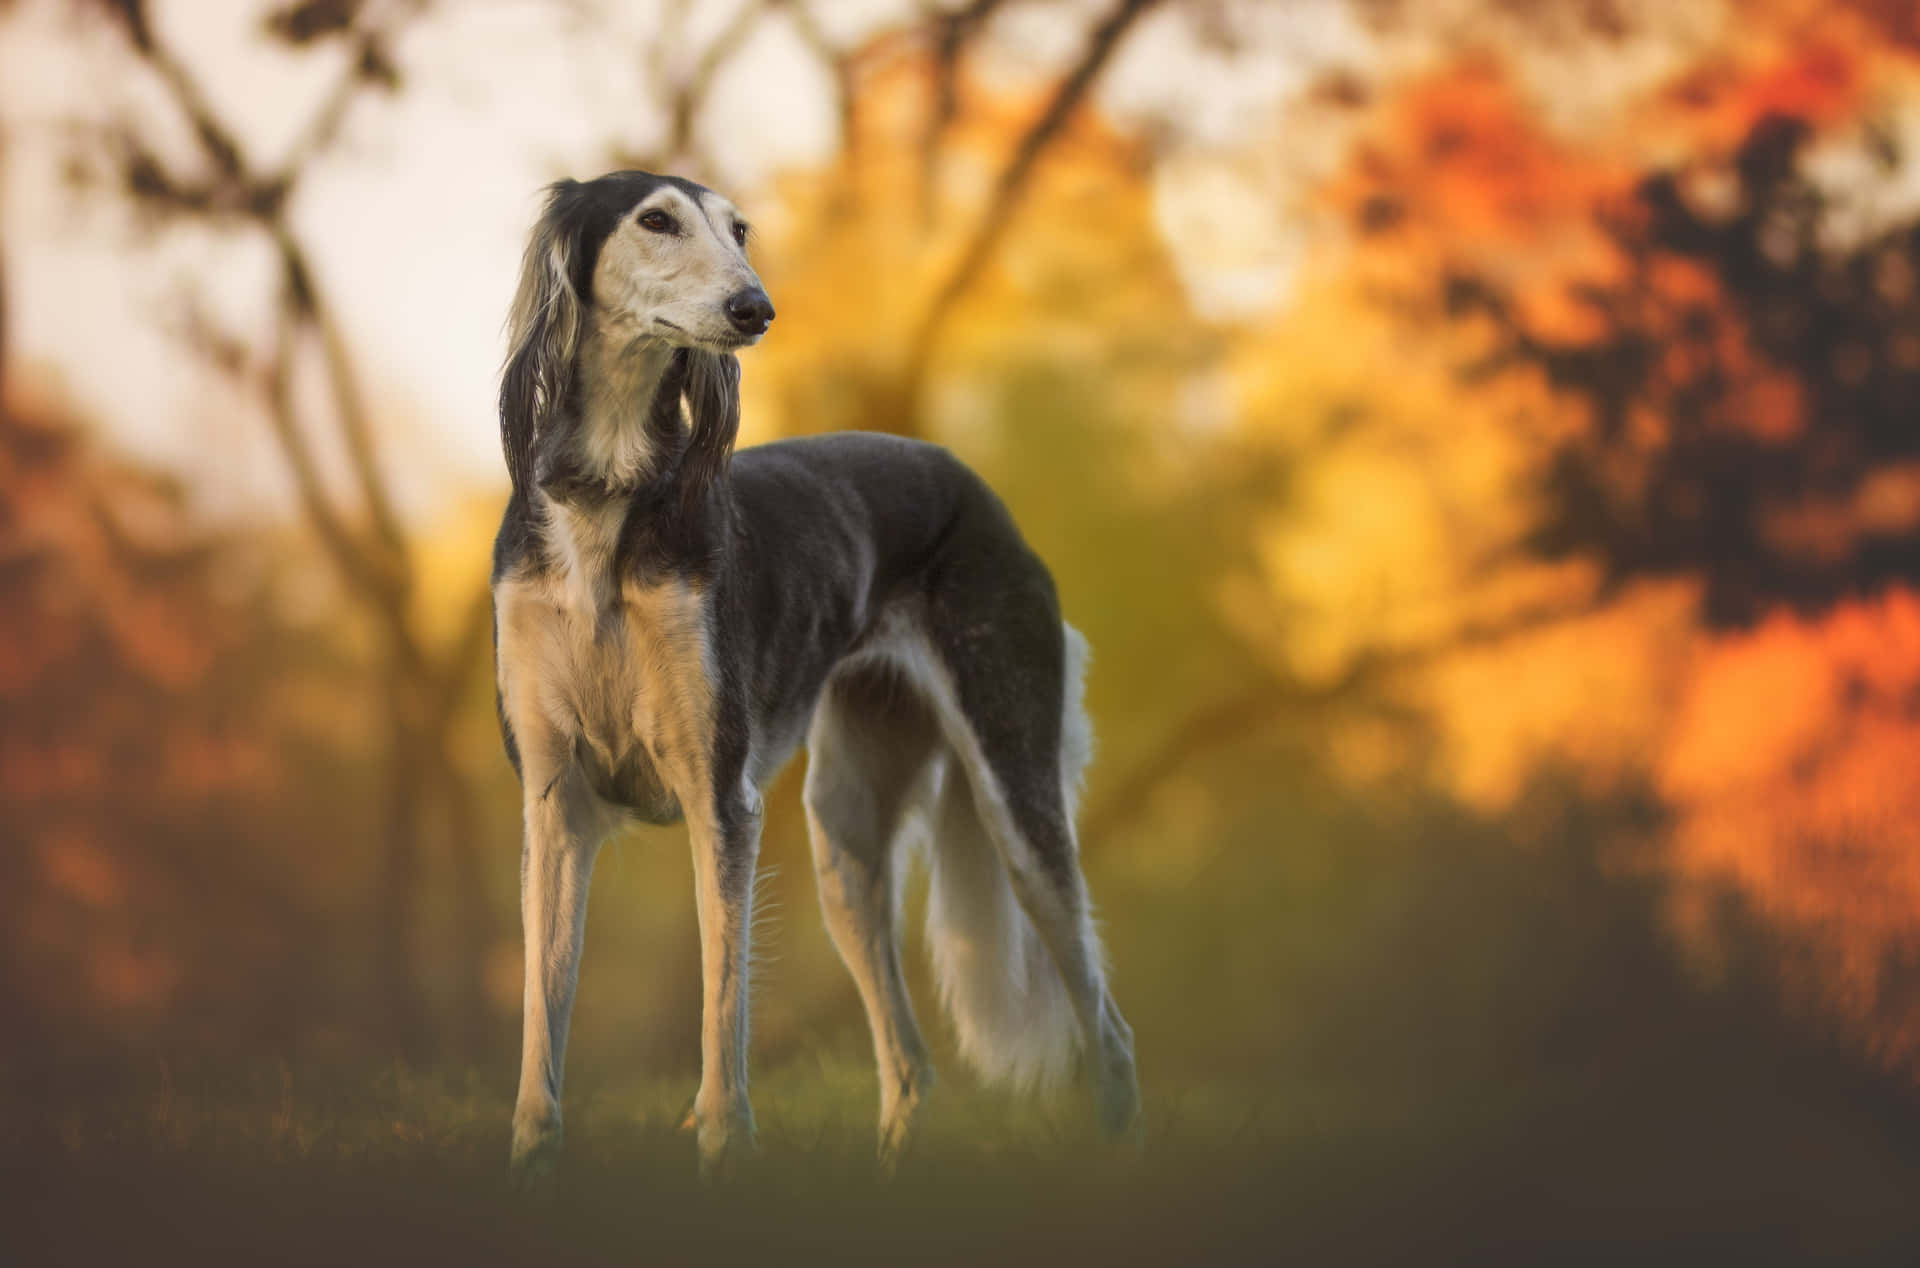 A Greyhound in the natural outdoor setting